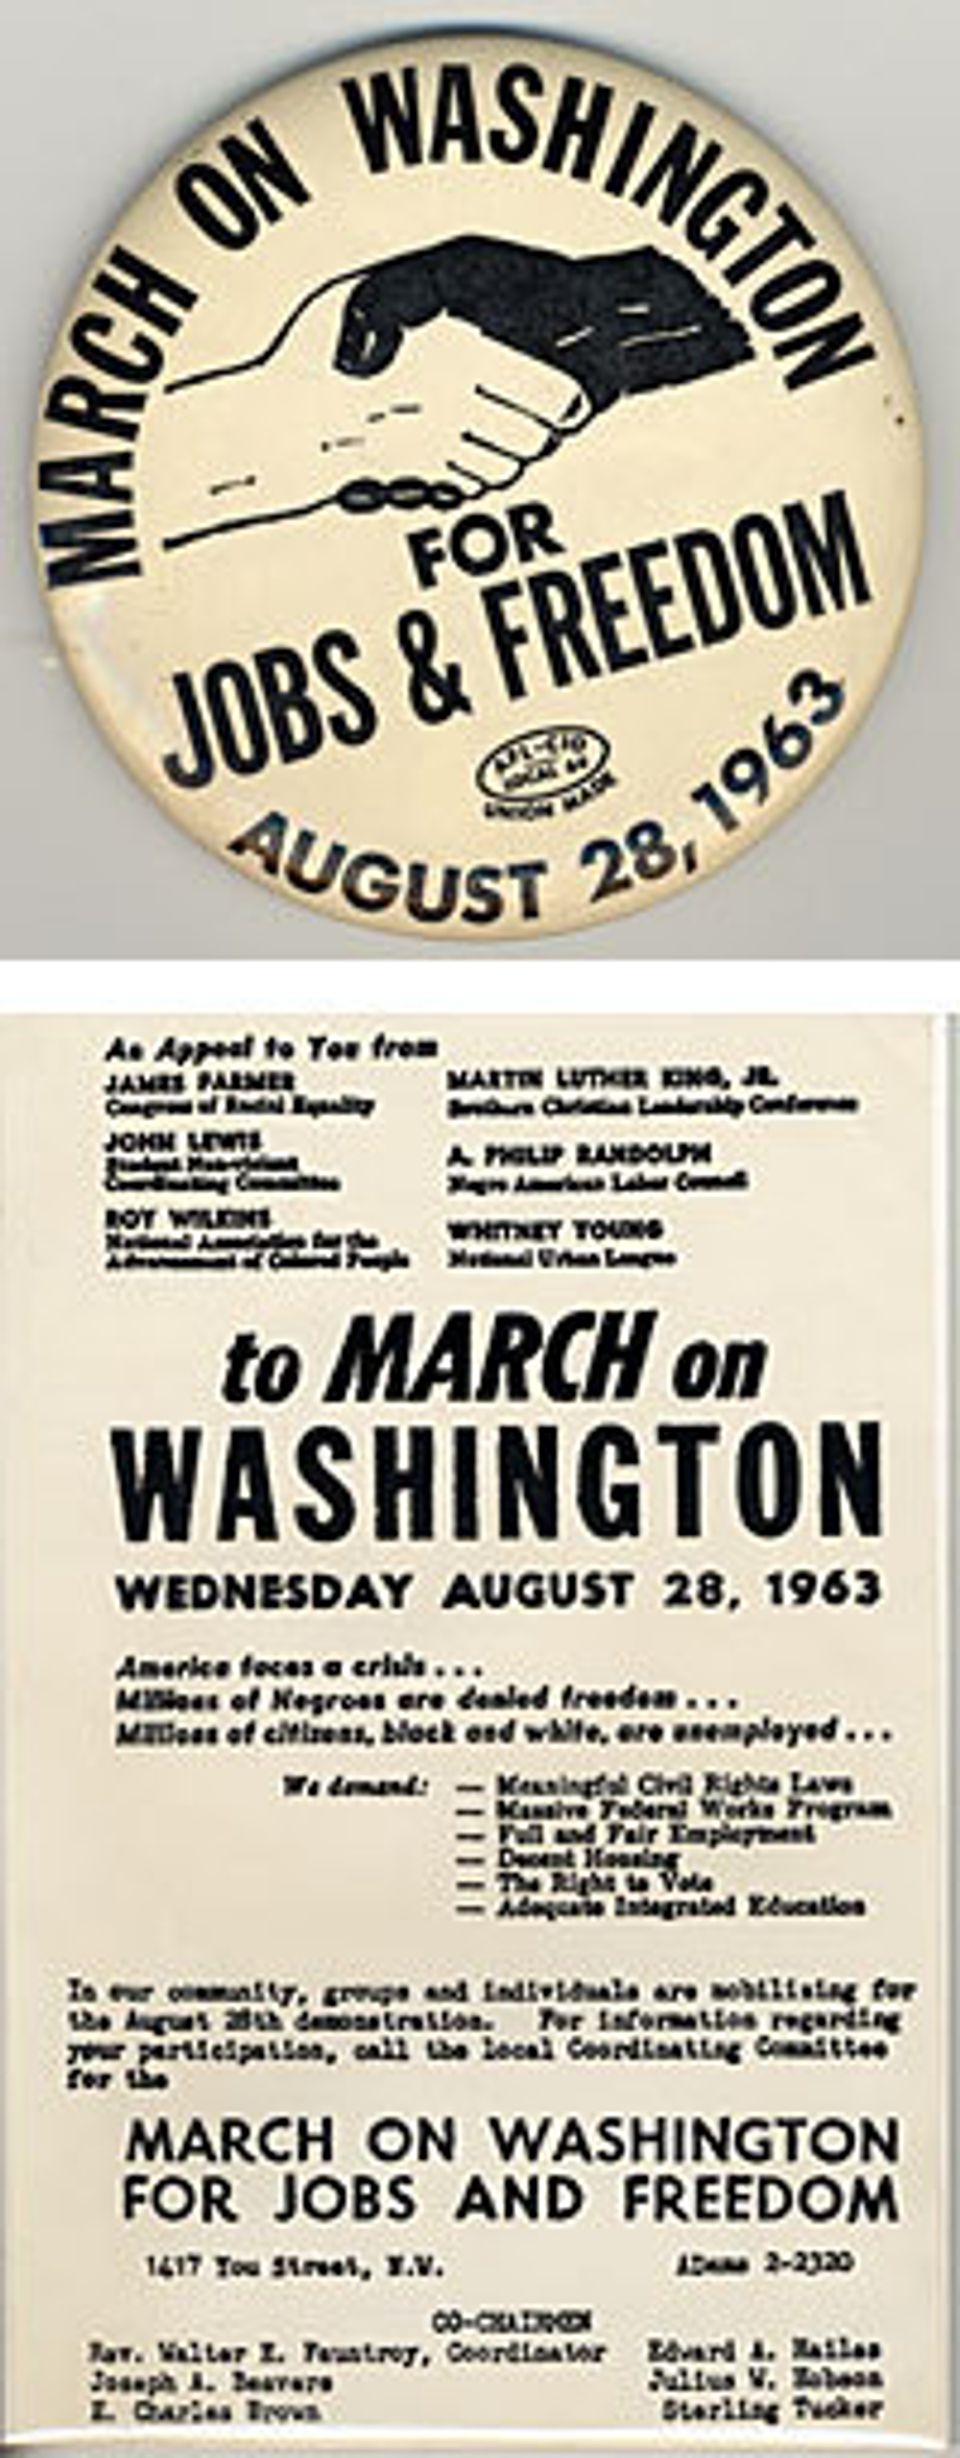 An image of a pin for the march on washington